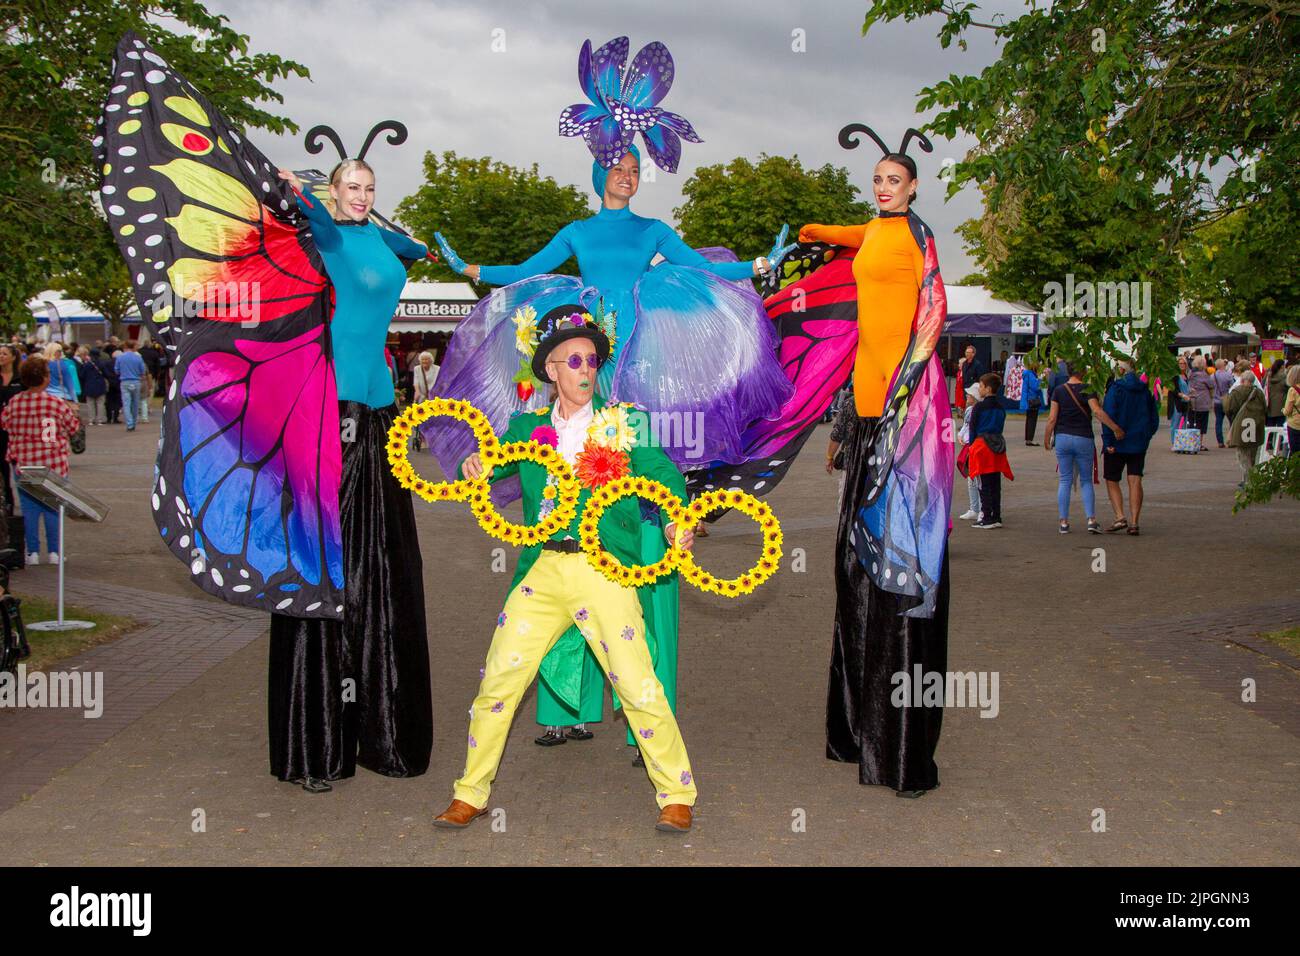 Southport Flower Show, Merseyside, UK. 17th Aug 2022:  Mr Flower, Greeters, promotion staff & entertainers at the largest independent flower show in England, which is expecting thousands of visitors over the four-day event as it opened today after a two-year Covid closure.  Credit: MediaWorld Images/Alamy Live News Stock Photo